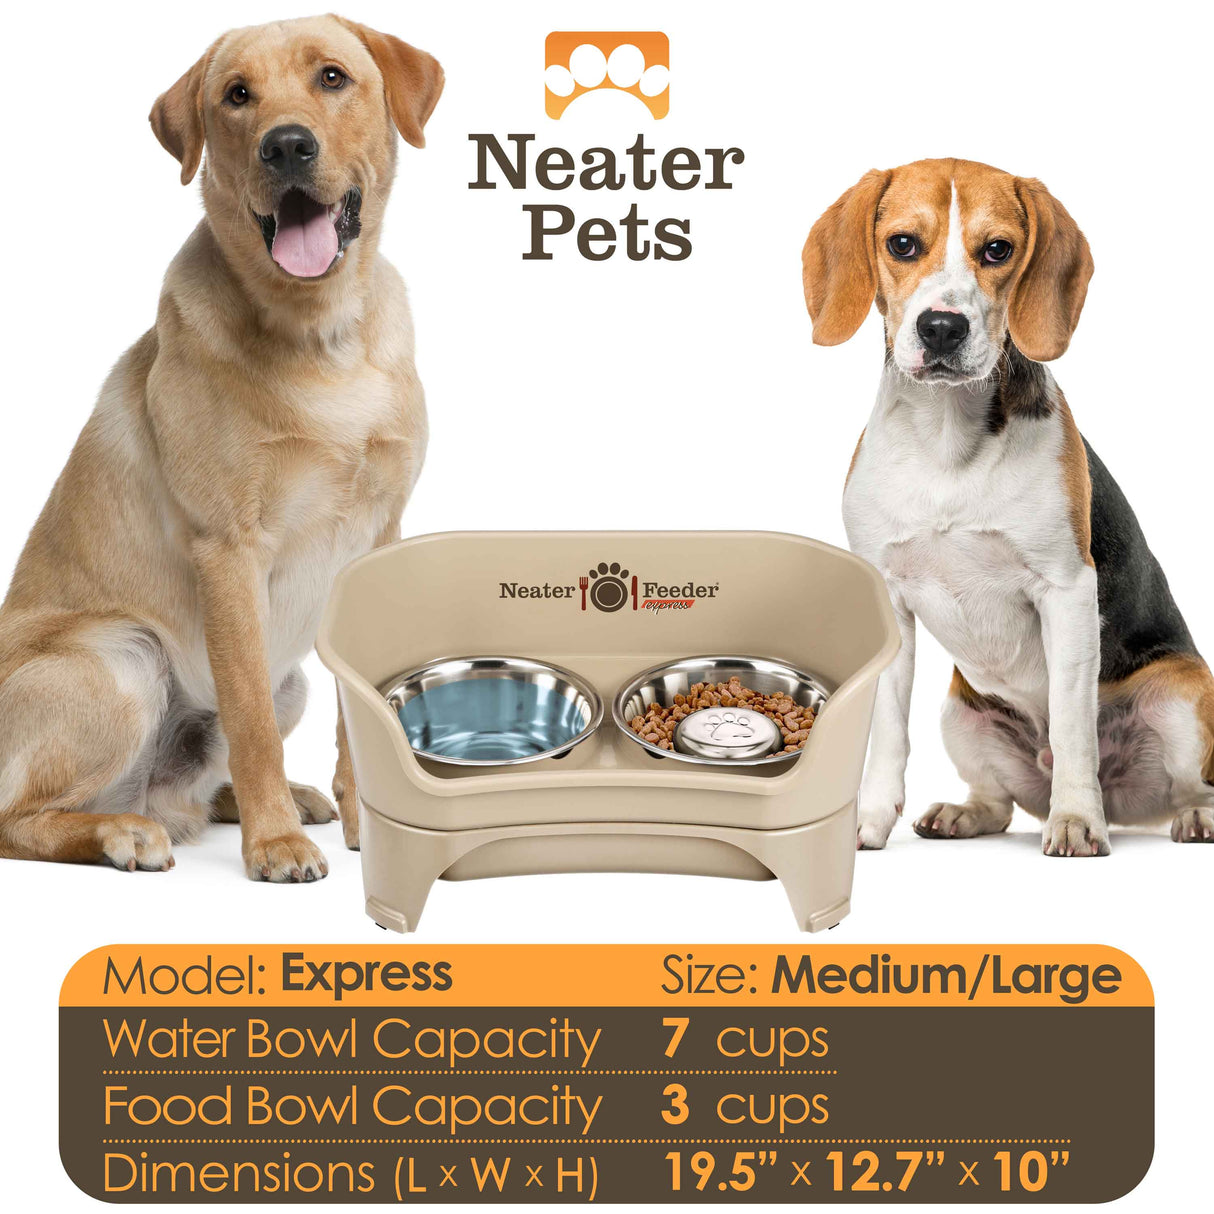 Information about the Almond medium to large EXPRESS Neater Feeder with Stainless Steel Slow Feed Bowl